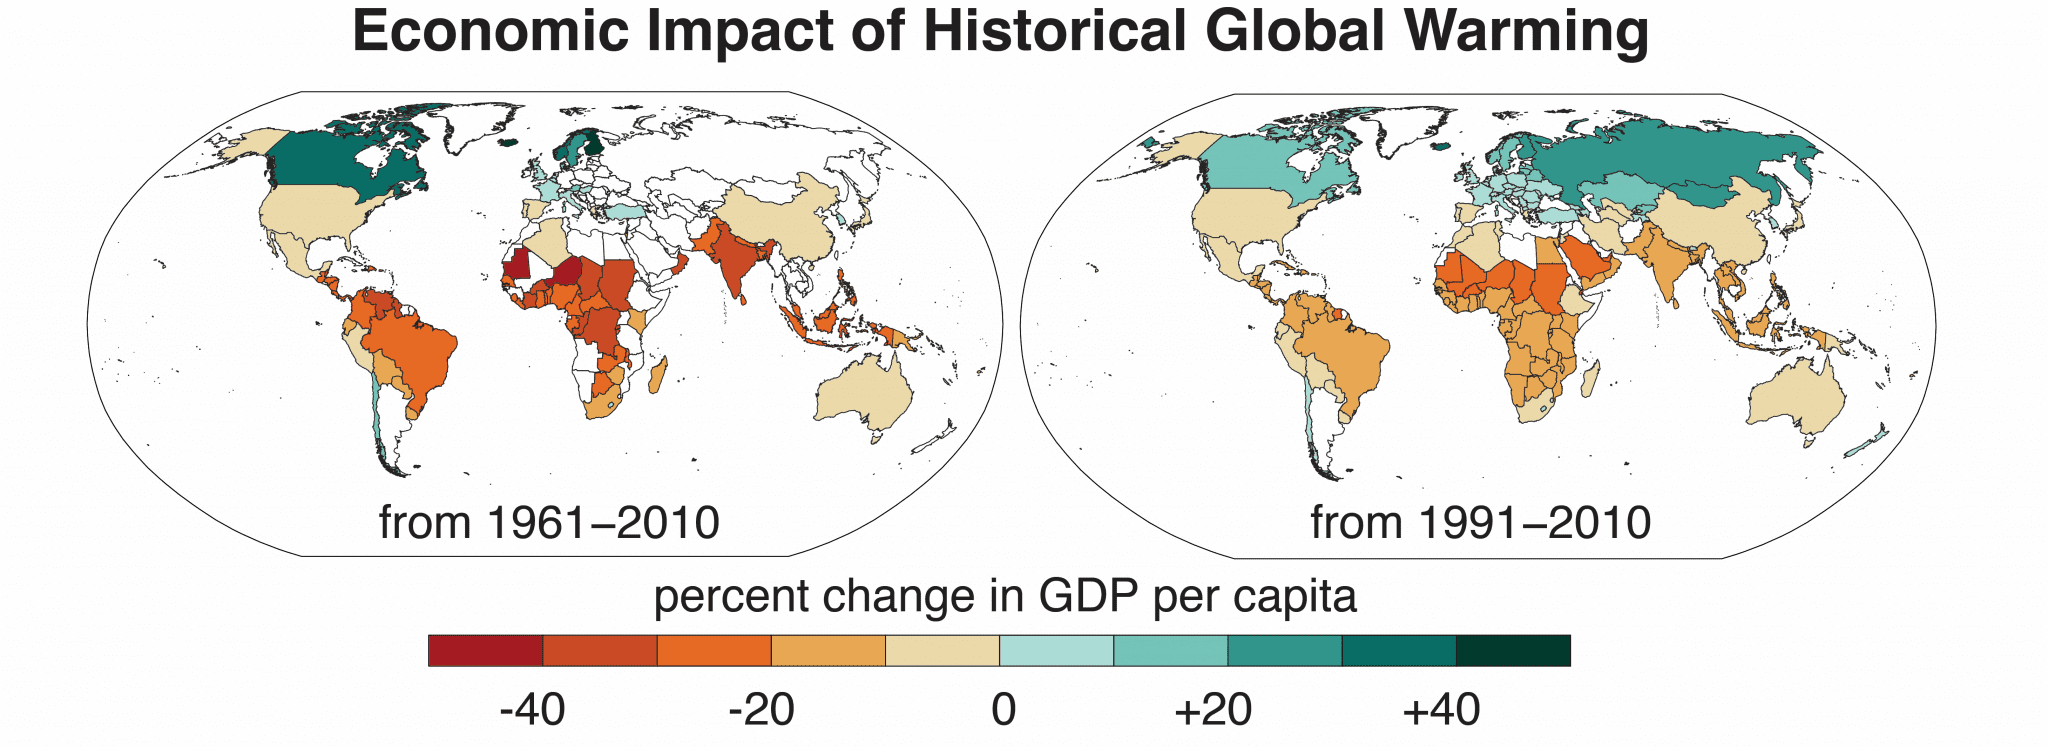 The economic impact of historical global warming